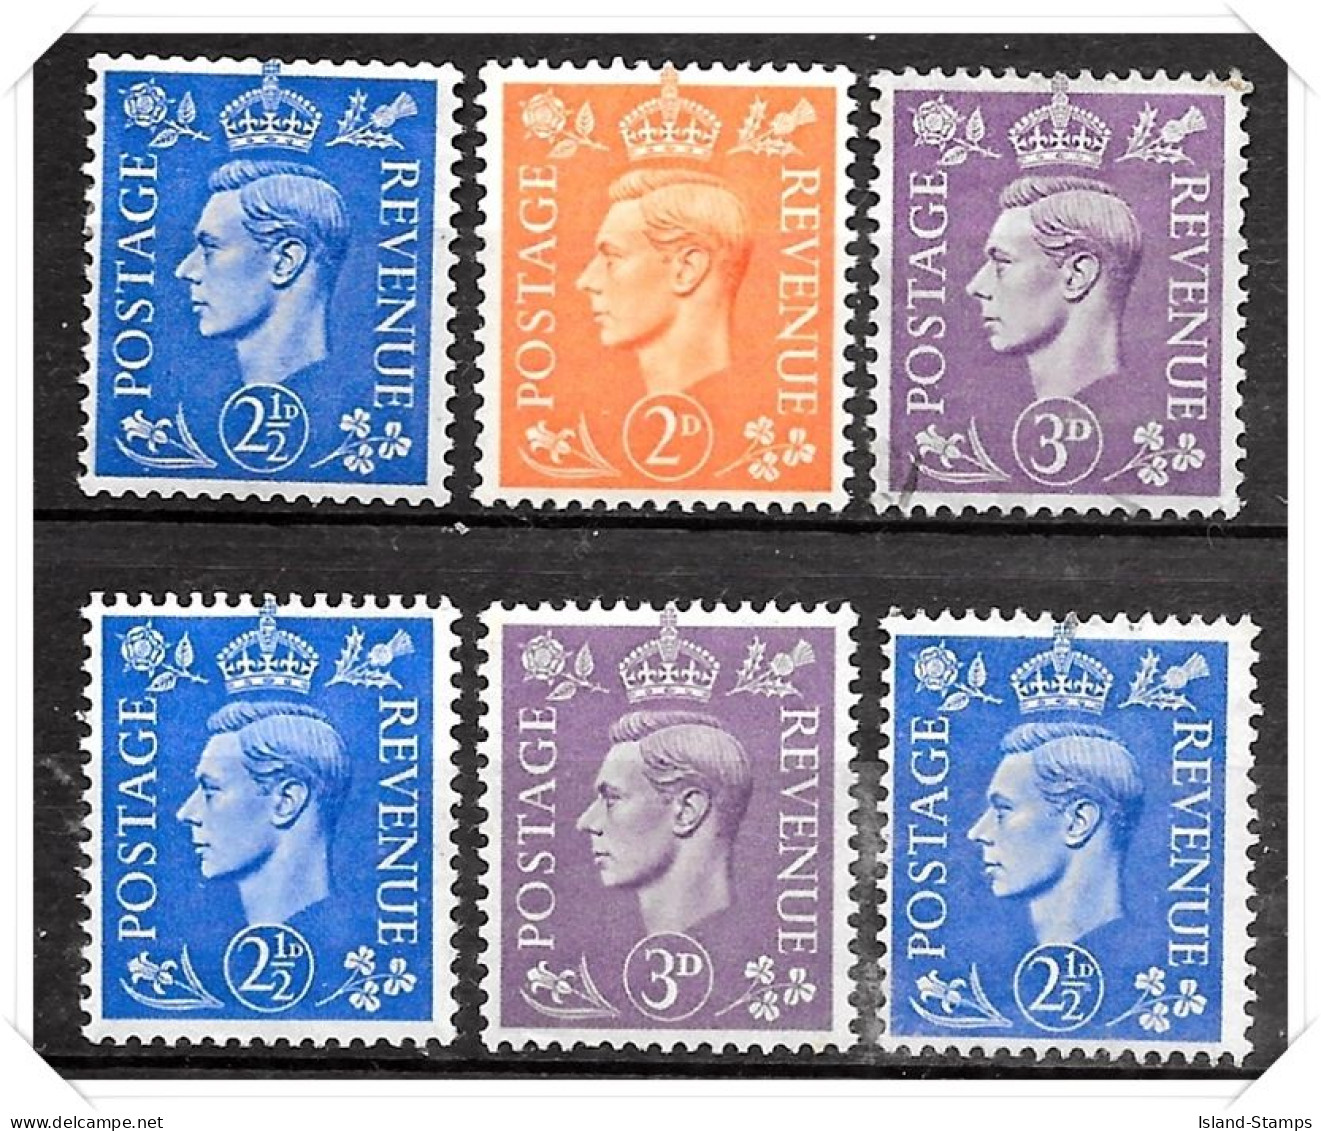 KGVI 1941 Definitives Colour Change SG485 - SG490 Used & Mounted Mint Hrd2a - Nuevos